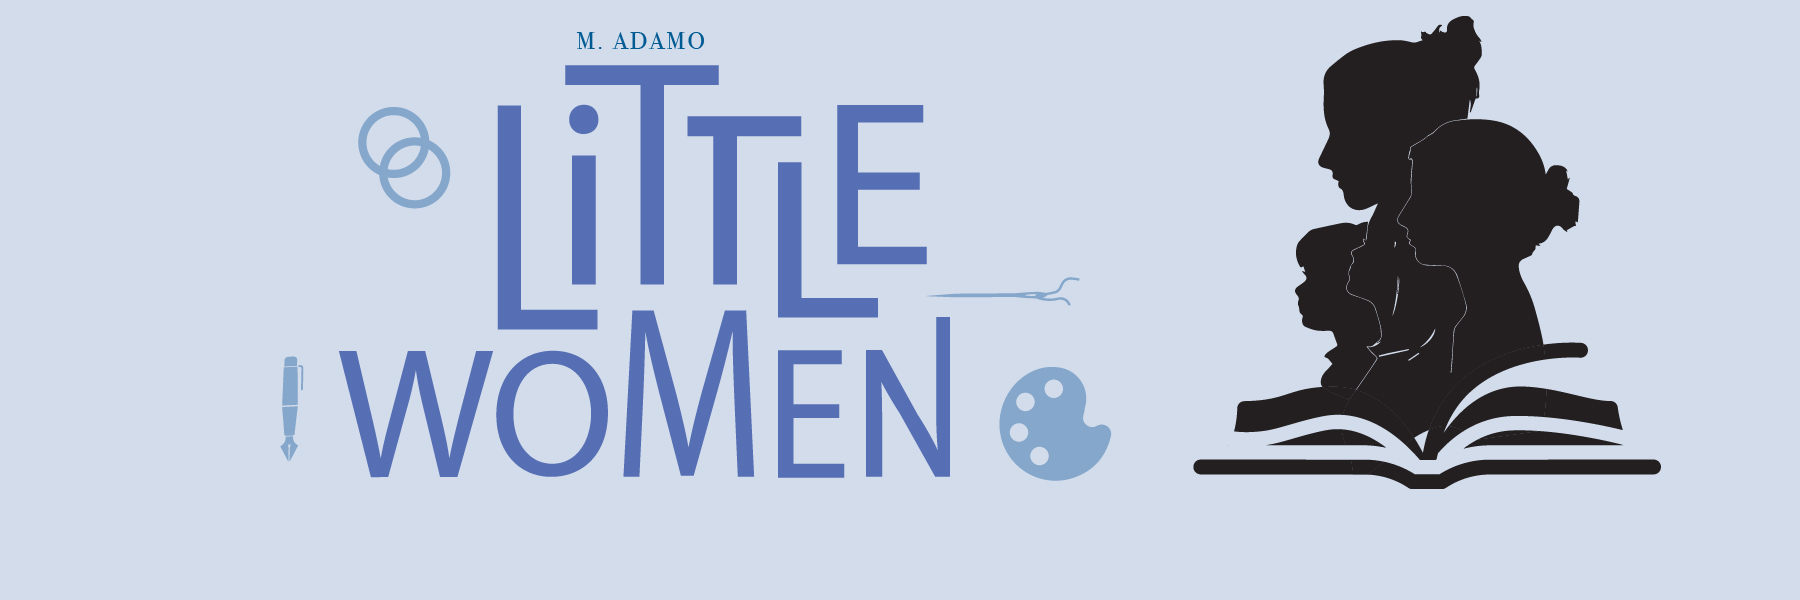 Title Art for Little Women, written by M. Adamo. Silhouette images of the four sisters with an open book. Surrounded by wedding rings, pen, sewing needle, and art palette.